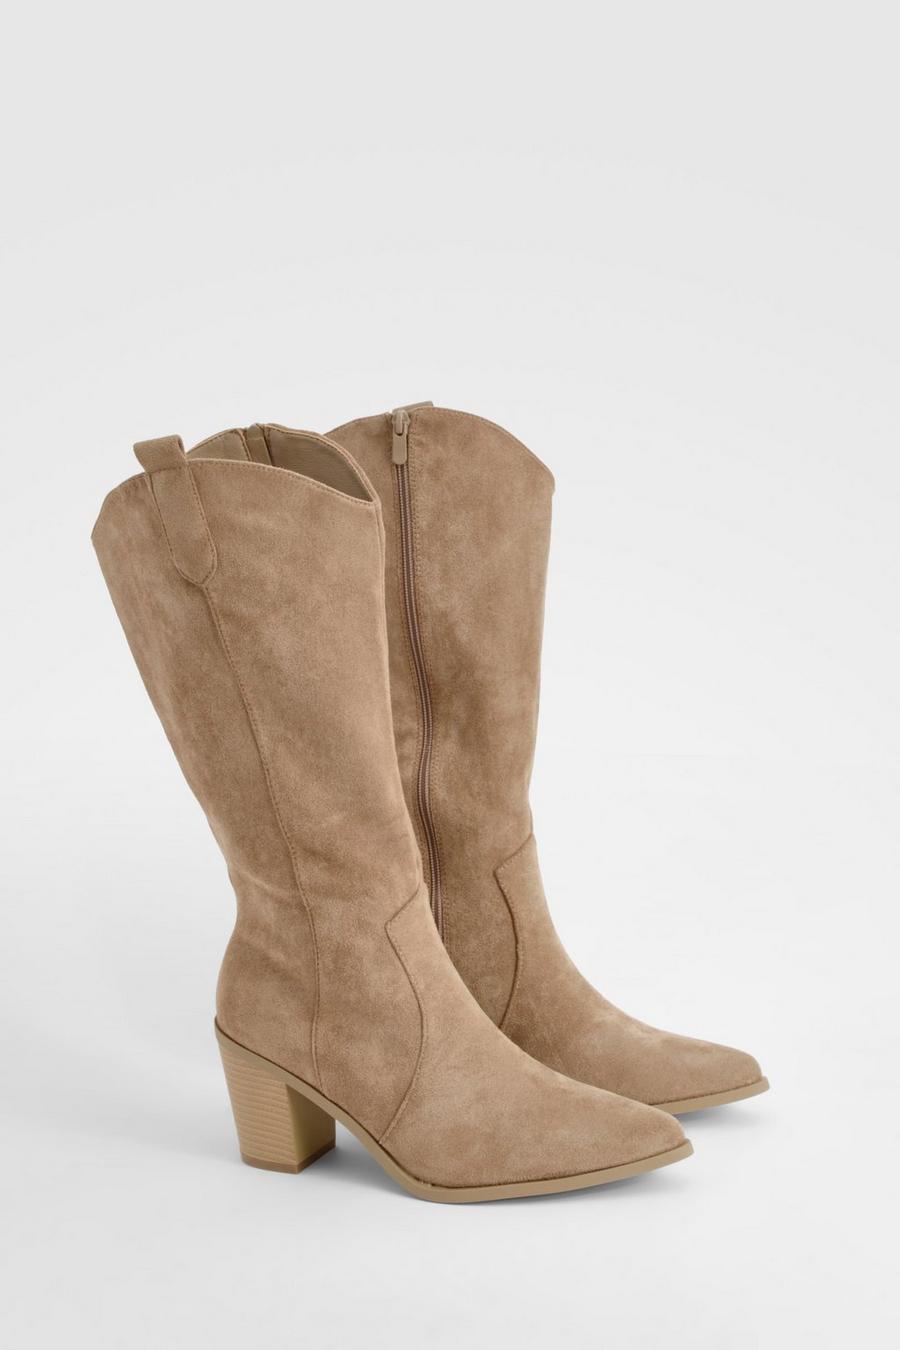 Taupe Western Style Pointed Toe Knee High Heeled Boot  image number 1